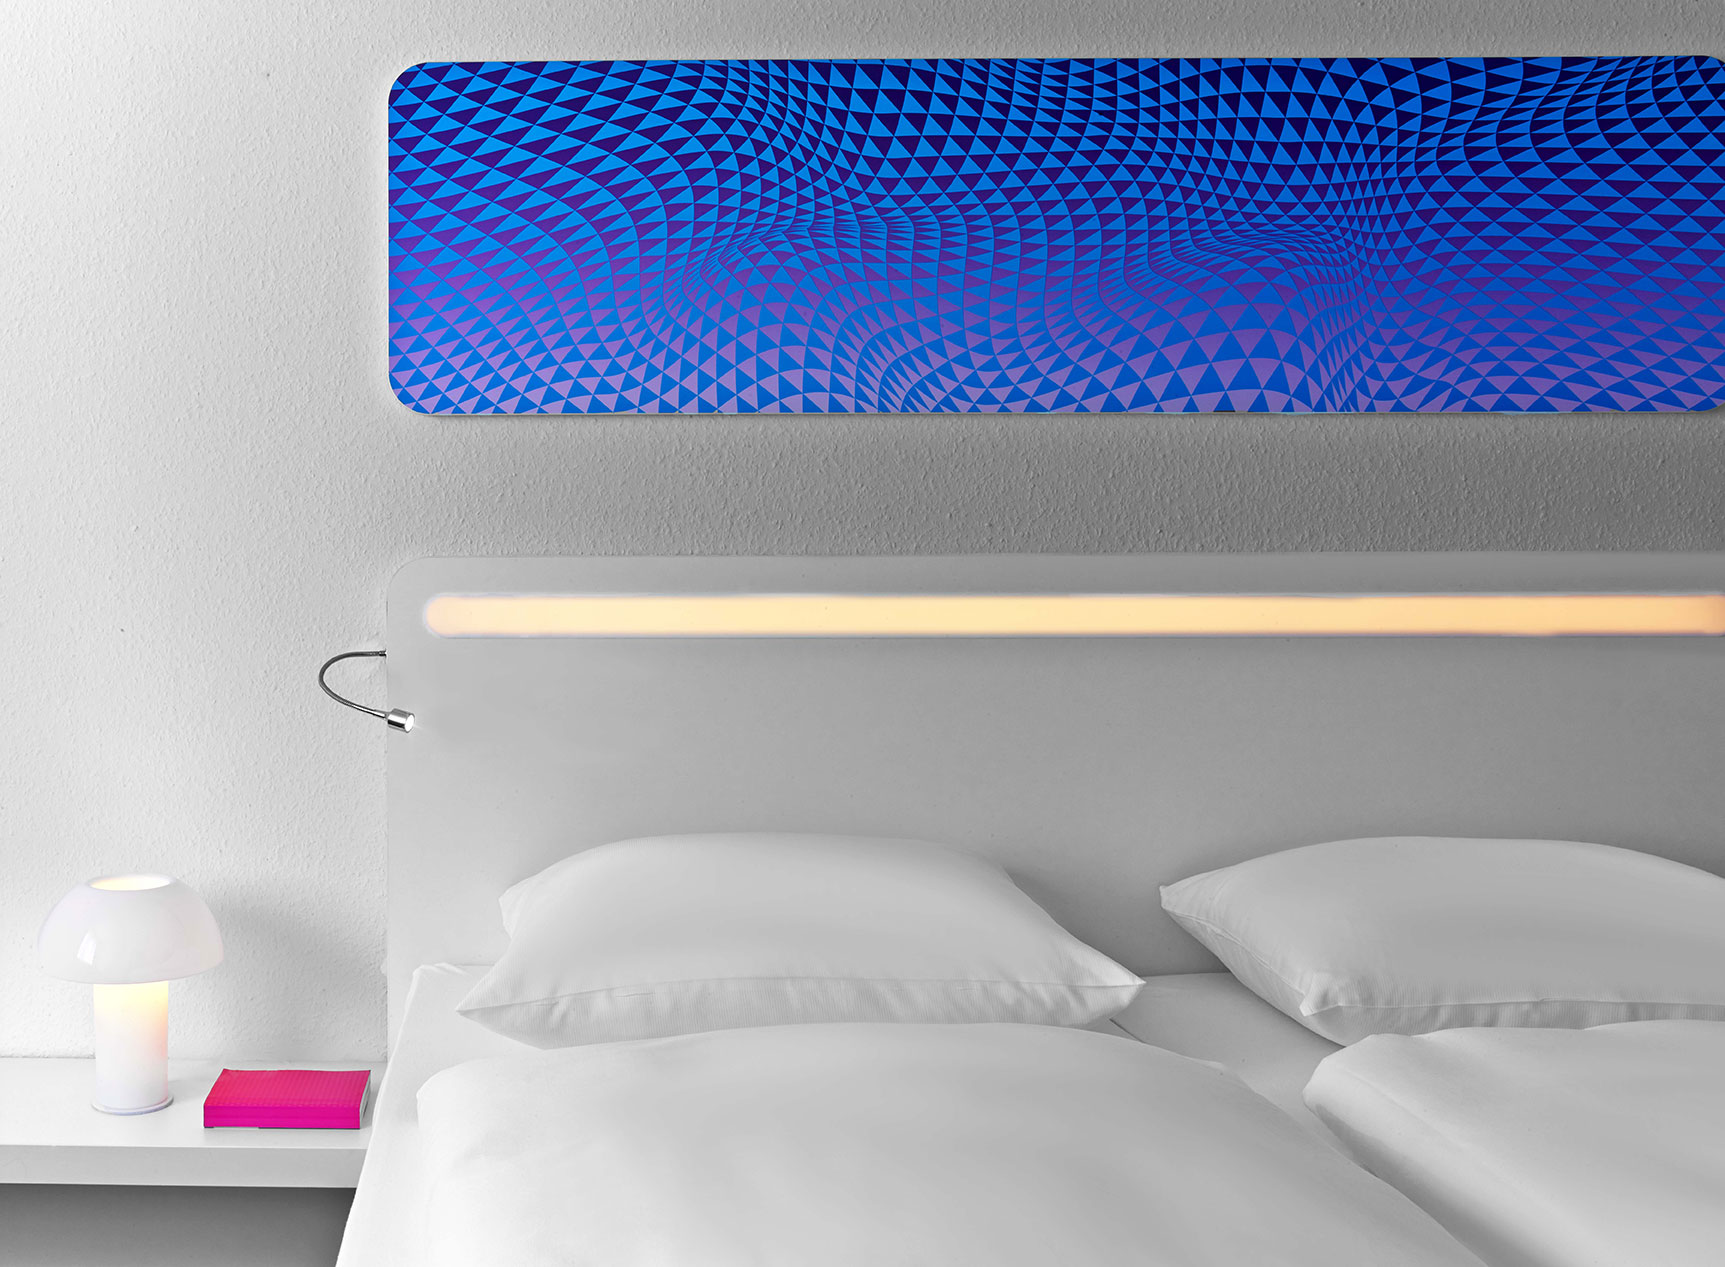 Details of a hotel bed with a reading lamp and a pink book on the nightstand